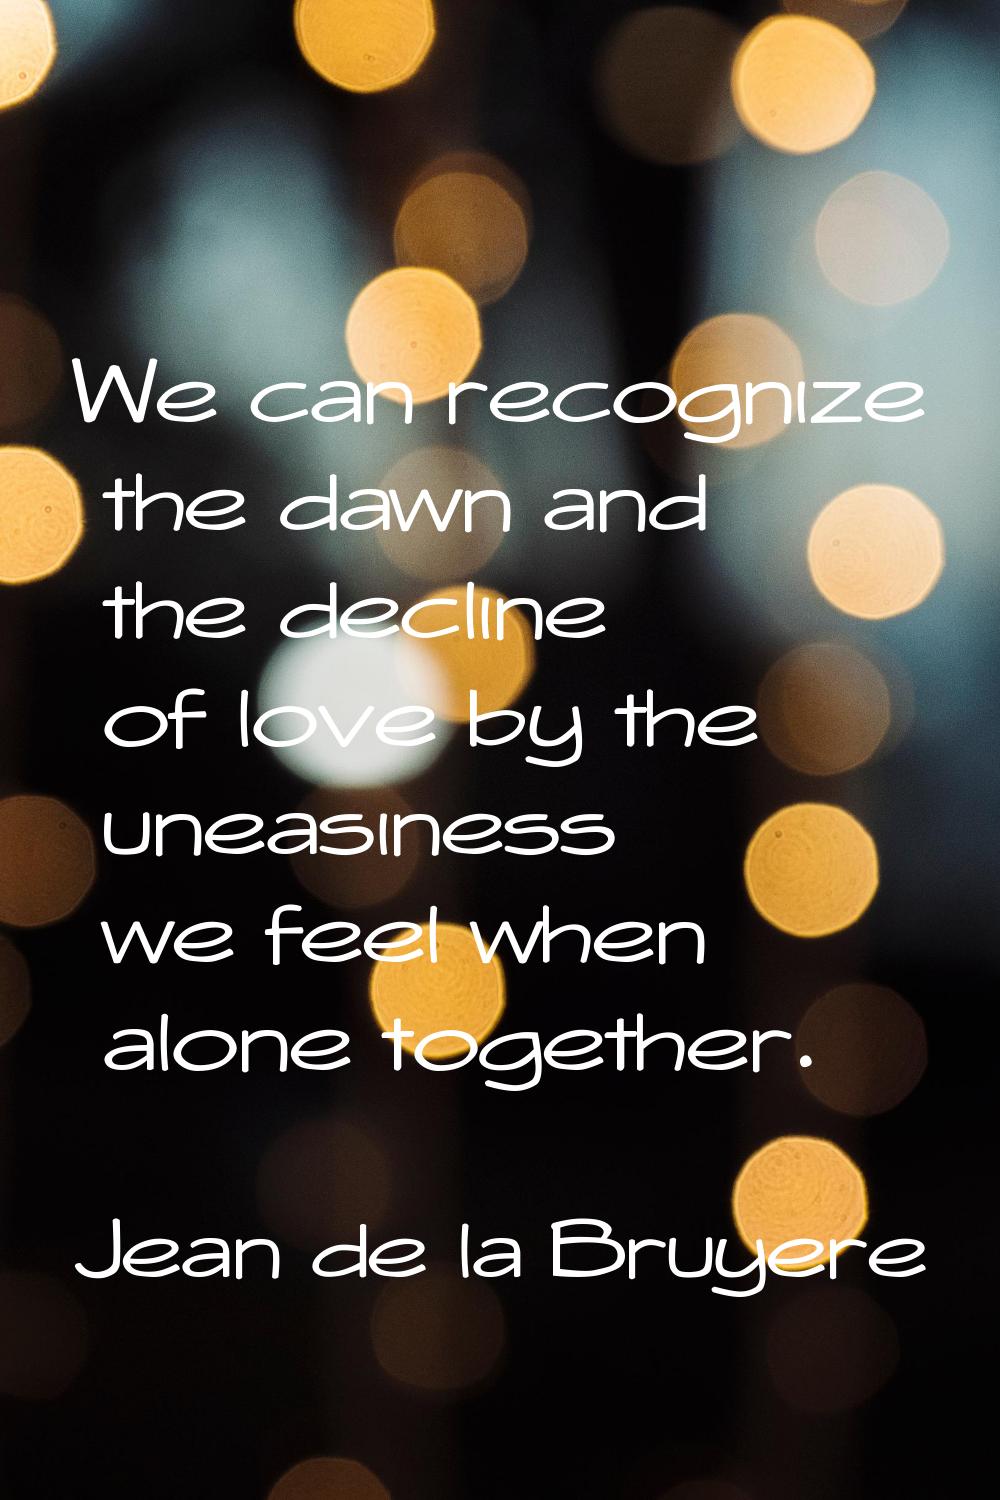 We can recognize the dawn and the decline of love by the uneasiness we feel when alone together.